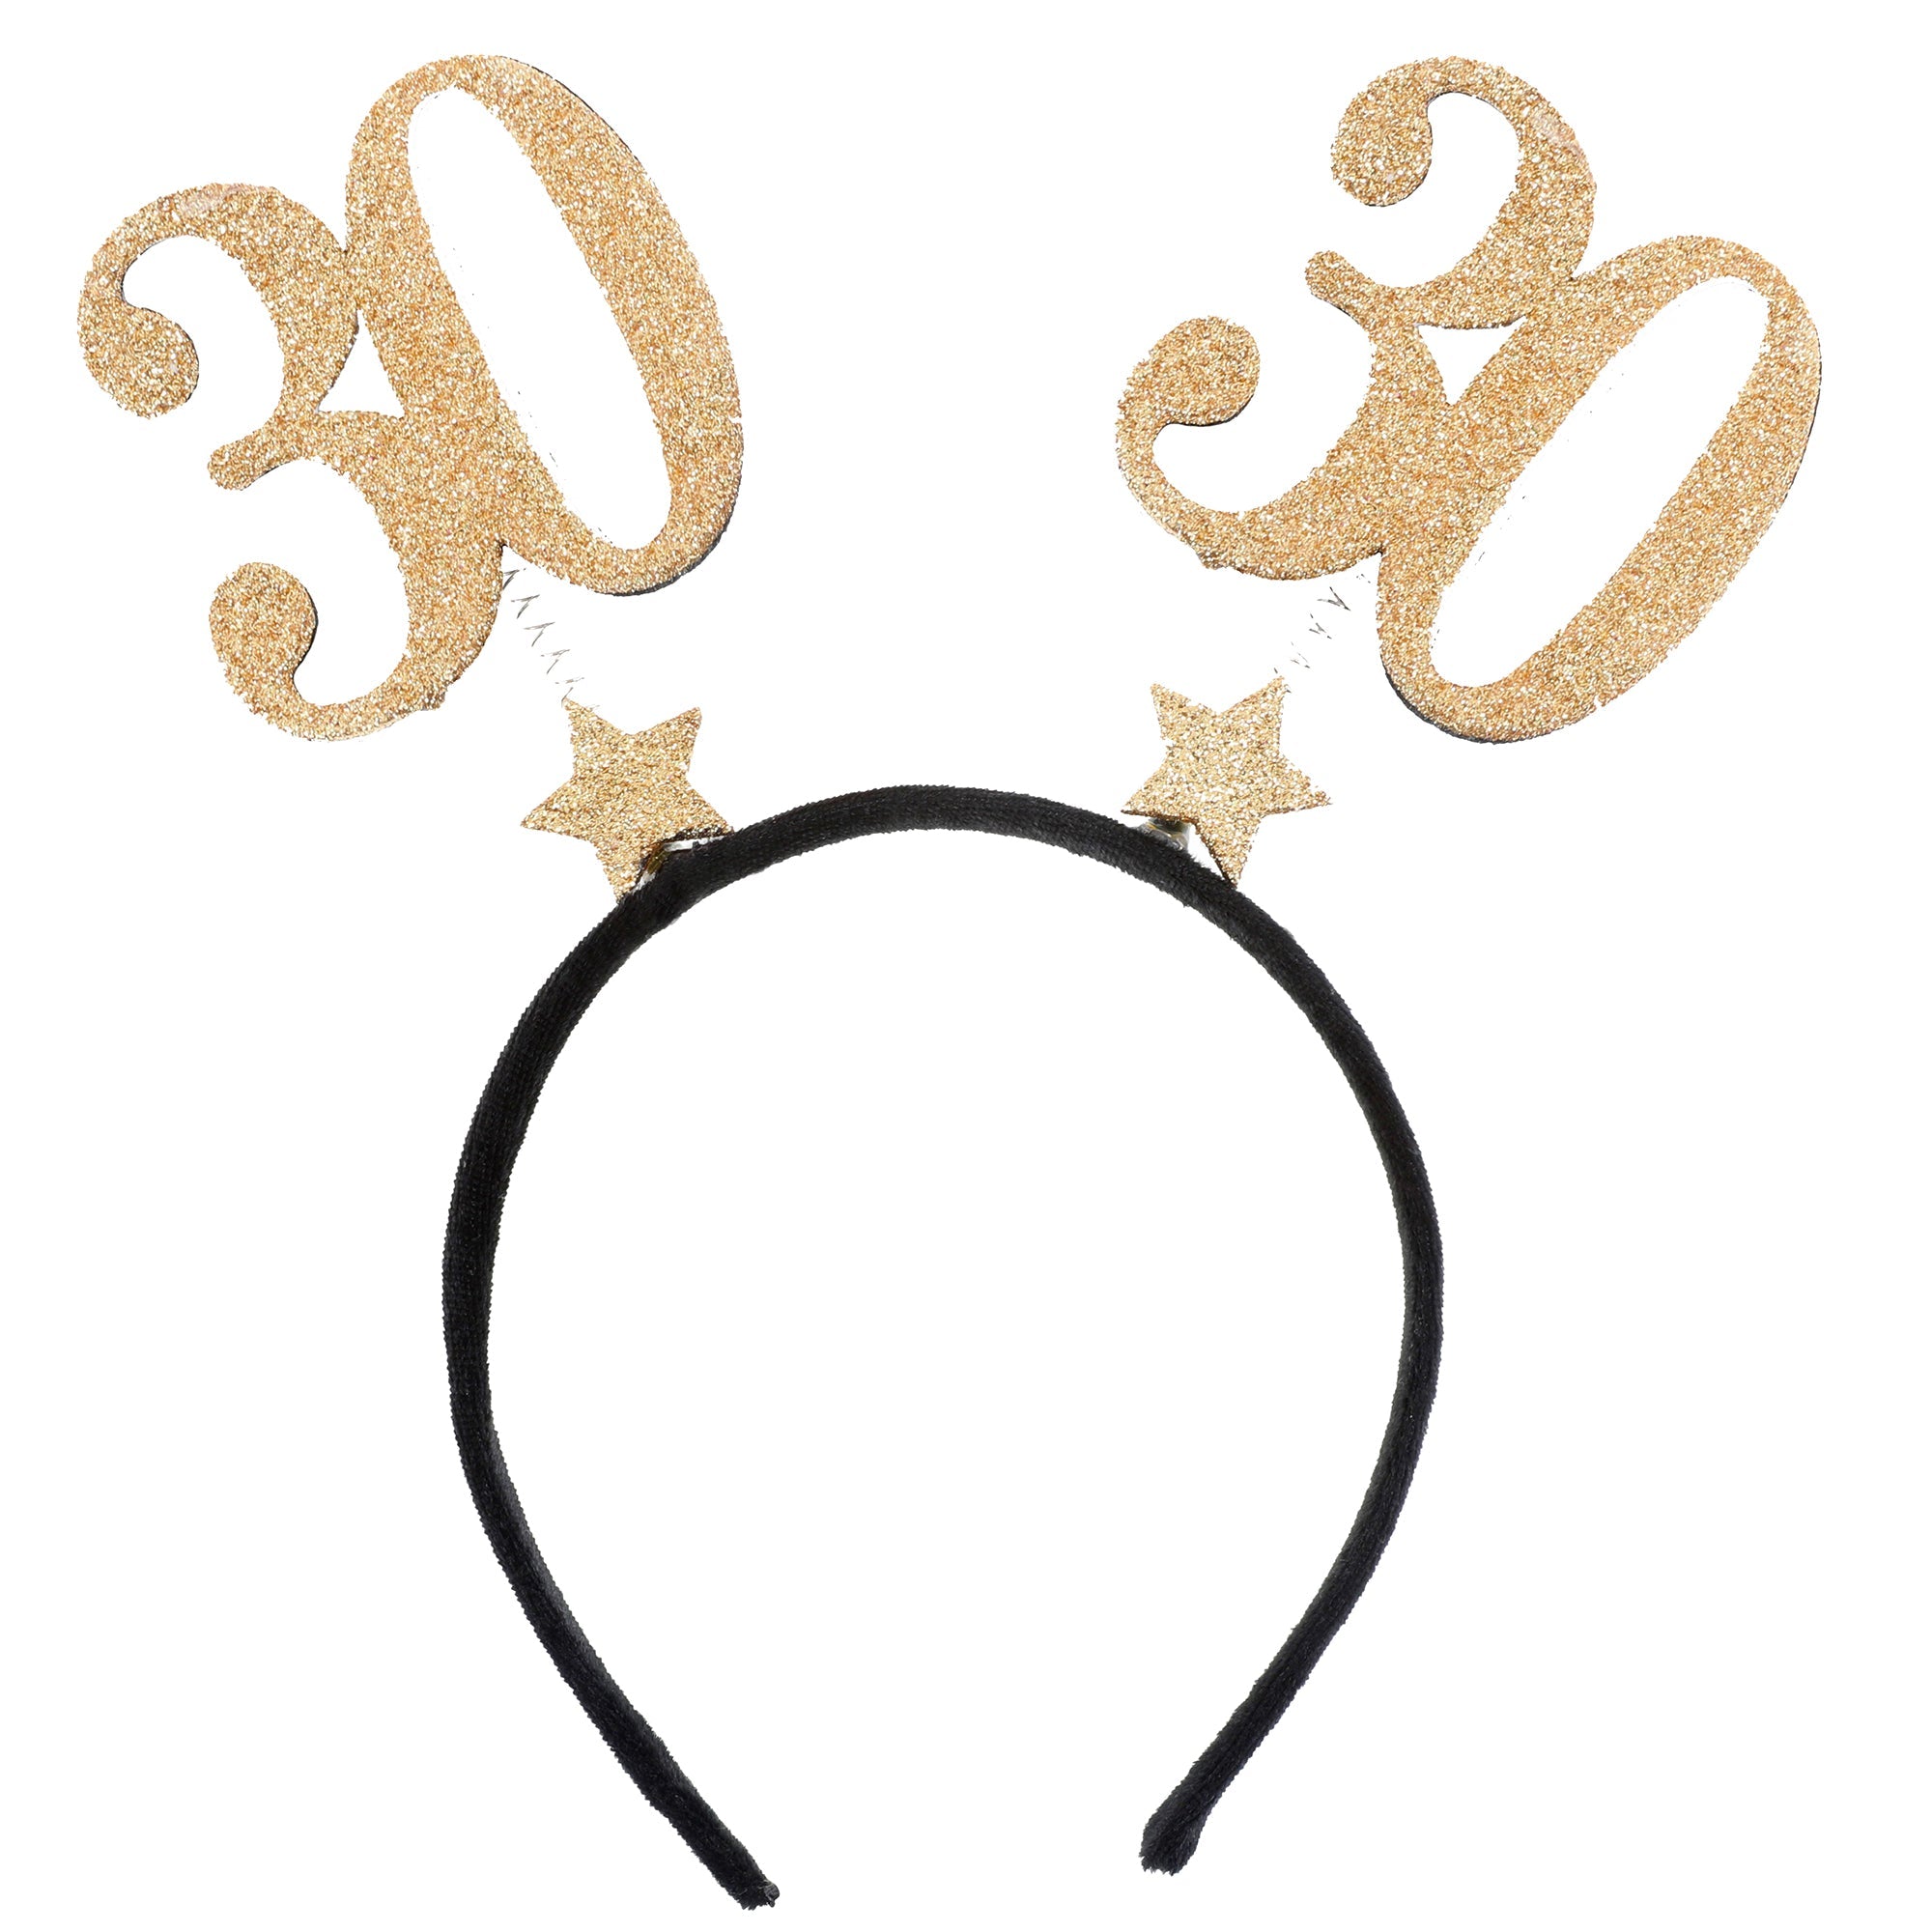 Age 30 Headband Black and Gold 8.3x9.8in